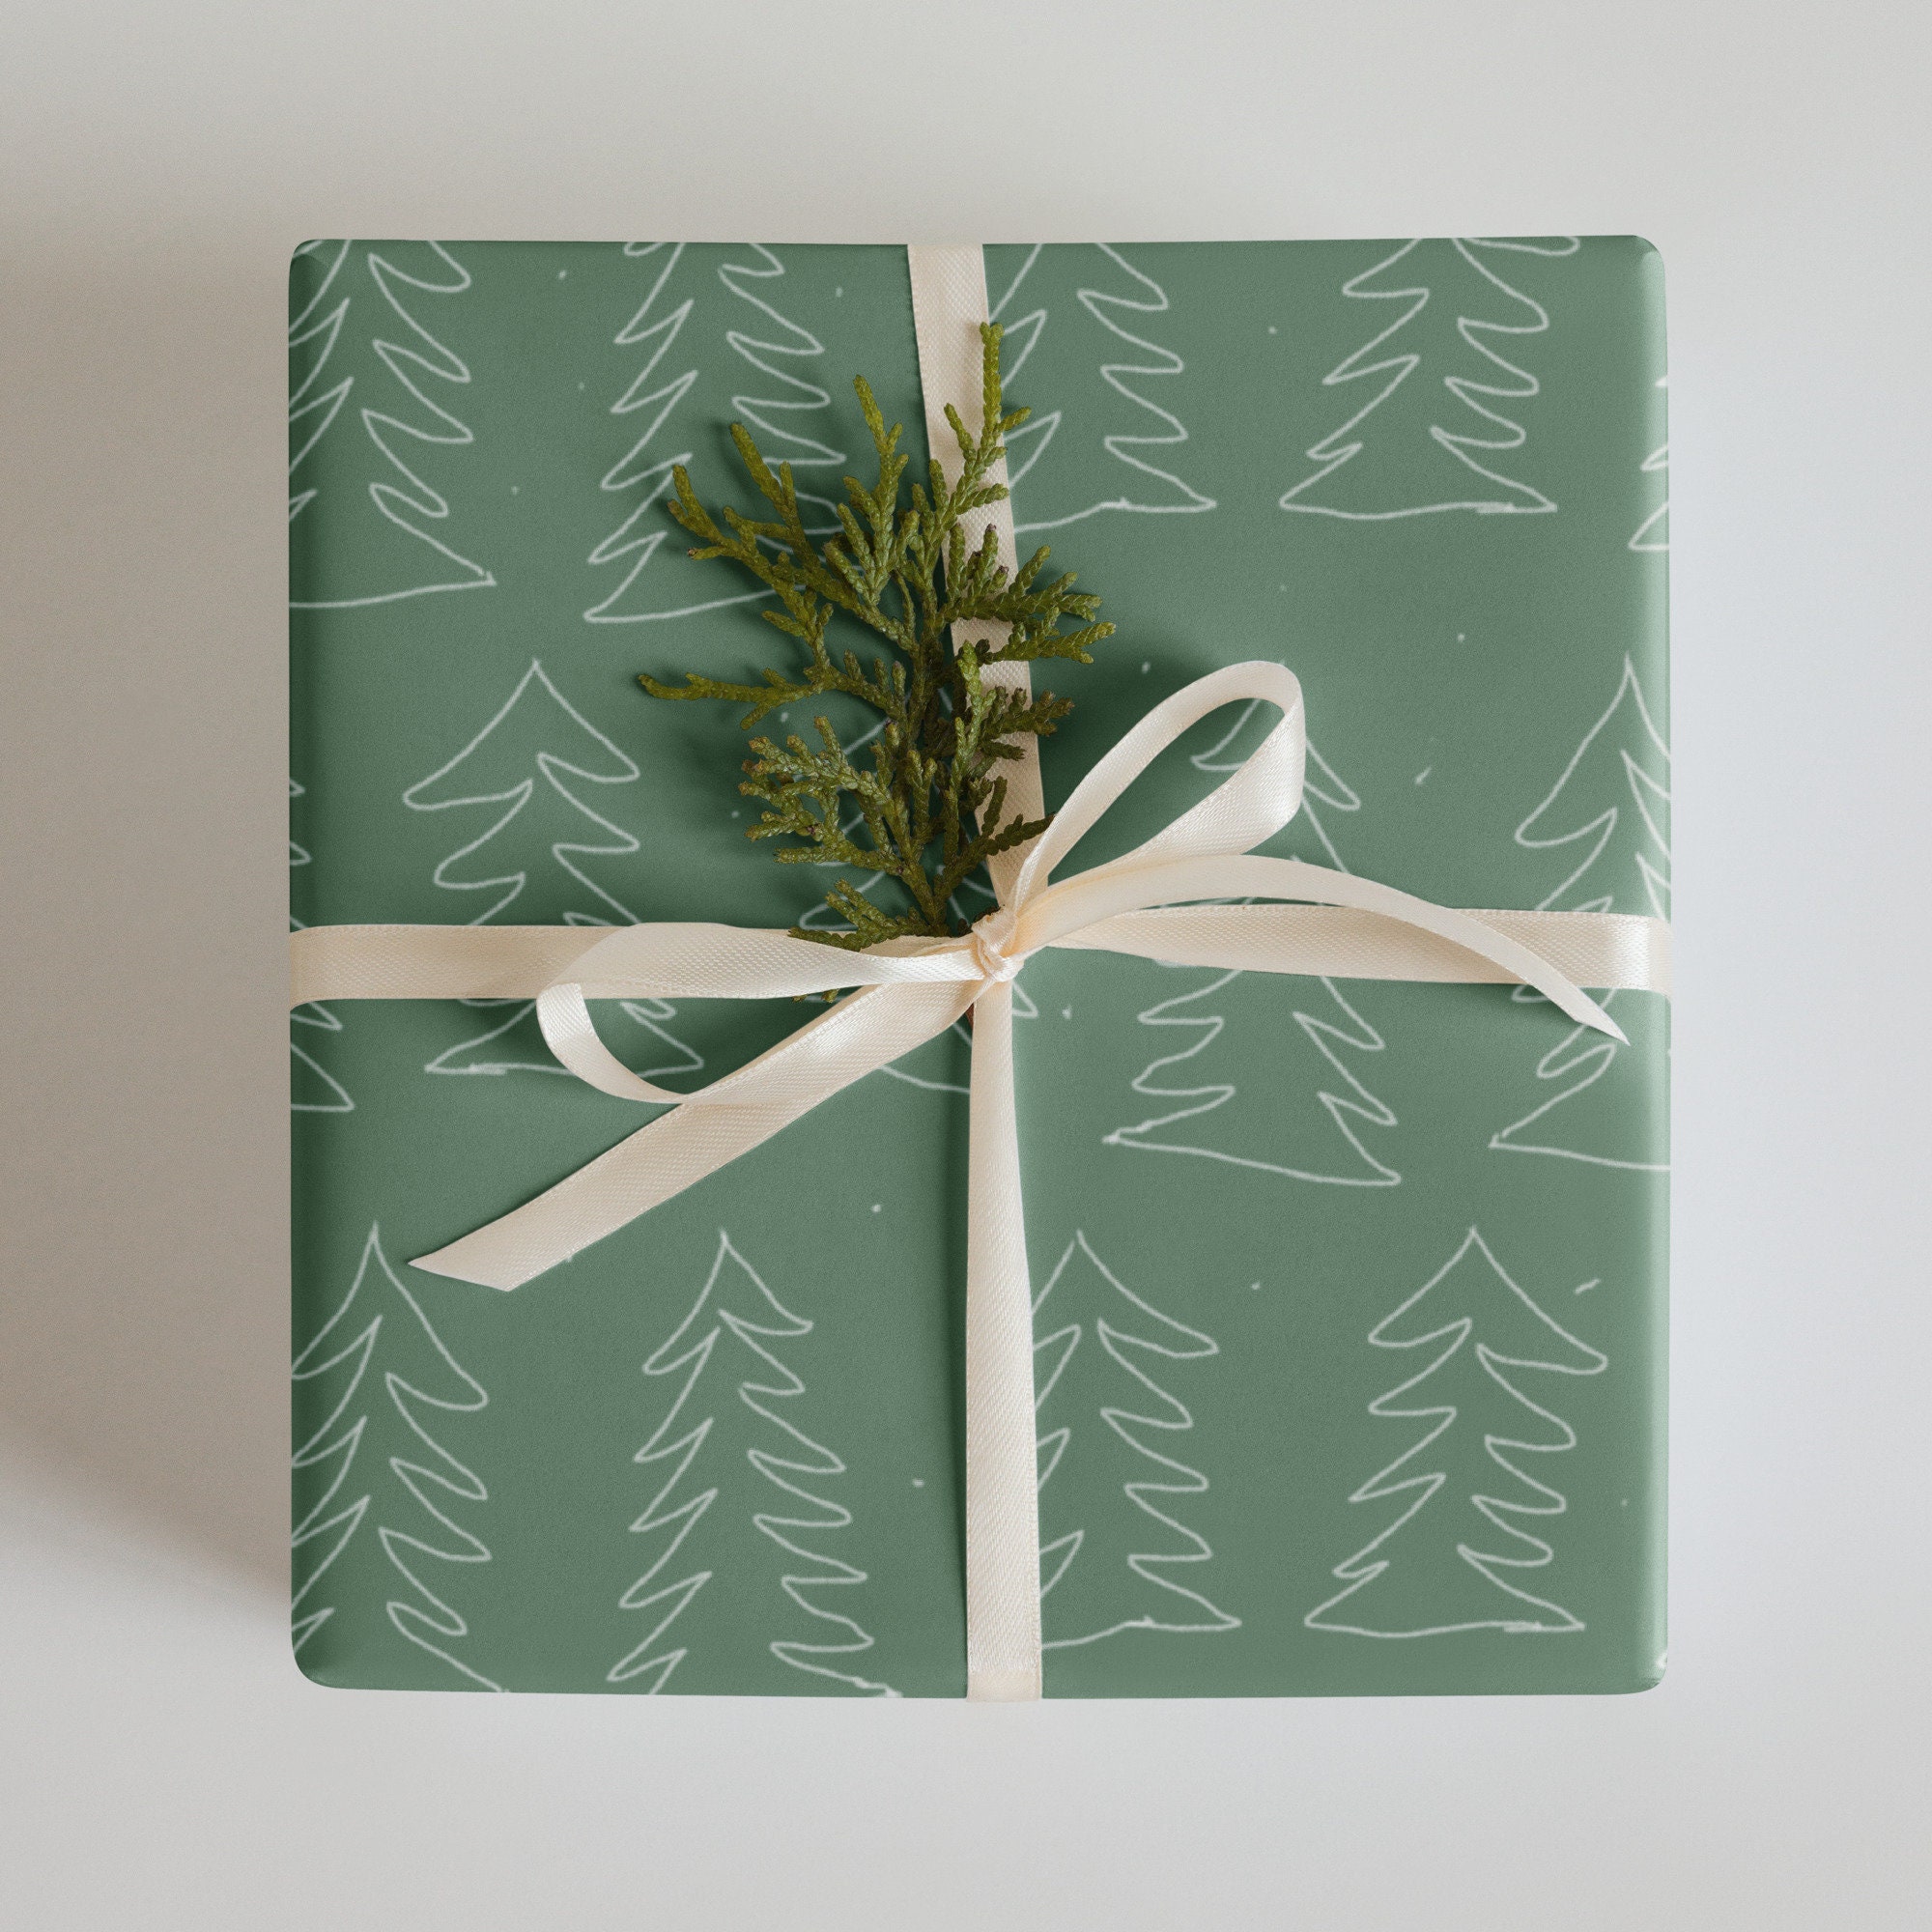 Cottage Style Christmas Wrapping Paper Ideas - Rain and Pine